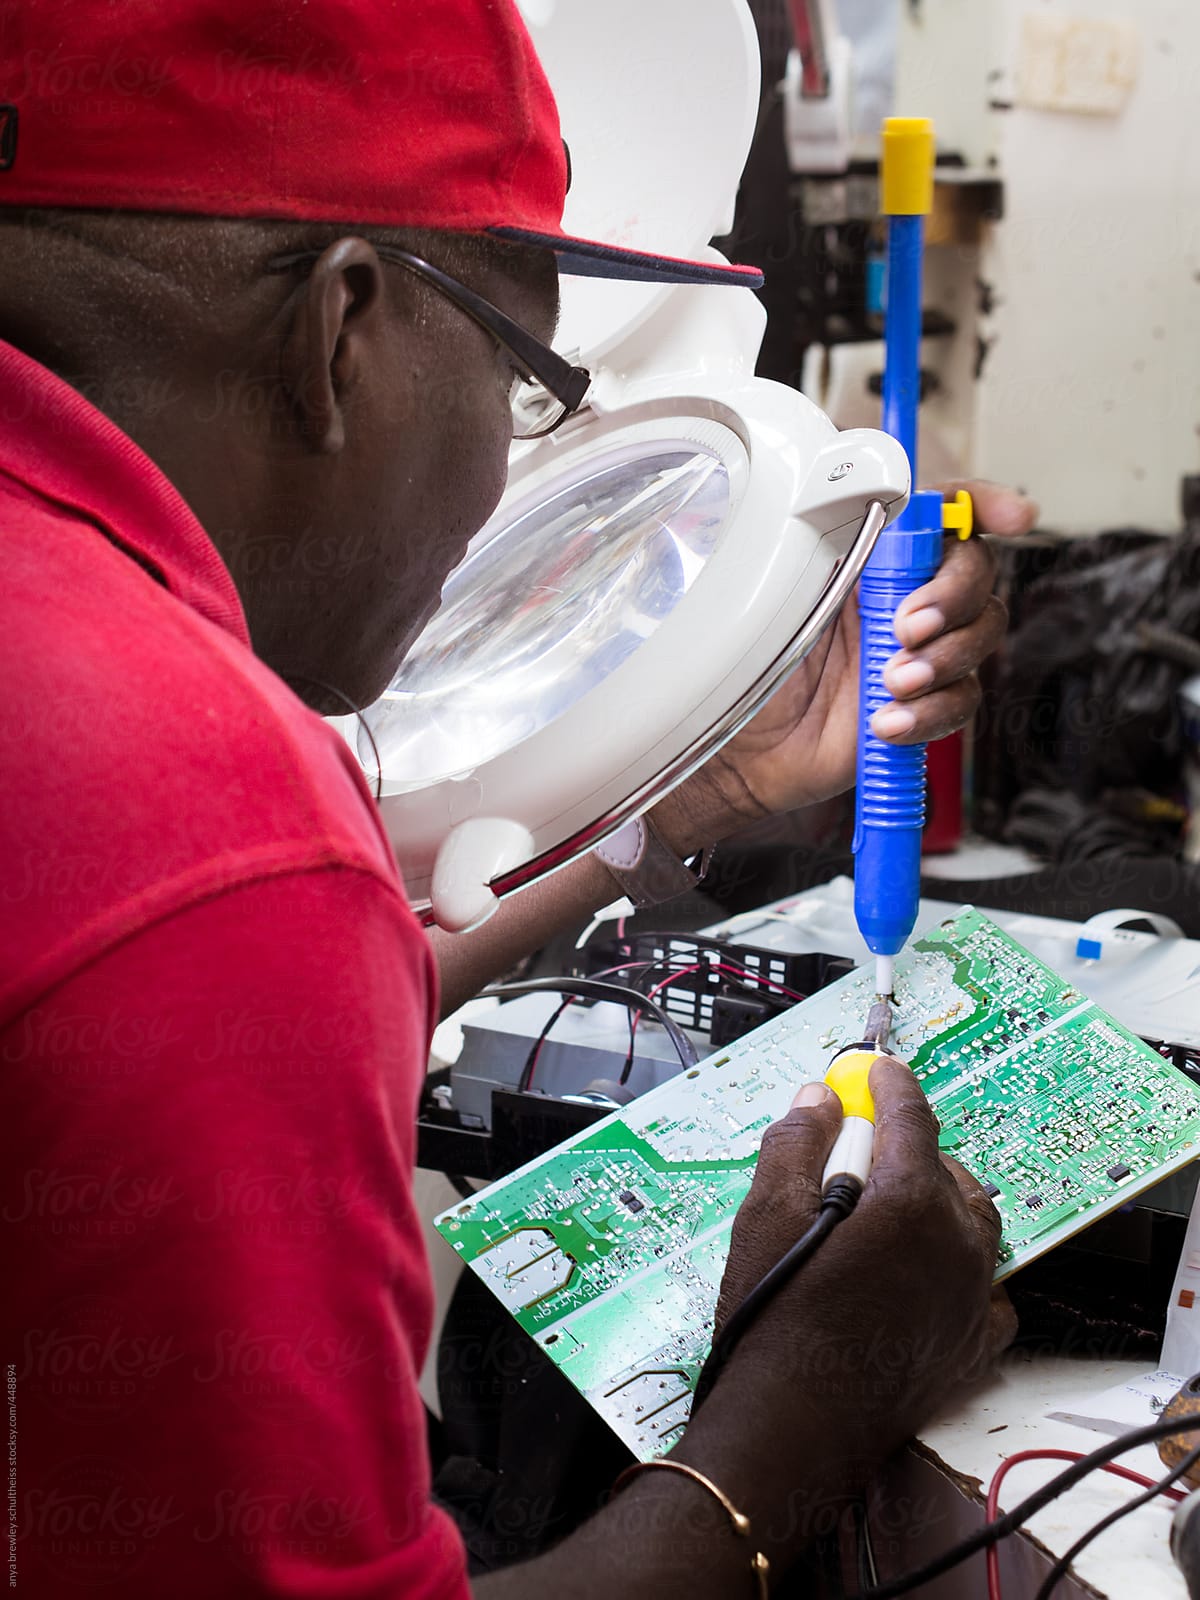 A male technician working on some electrical equipment